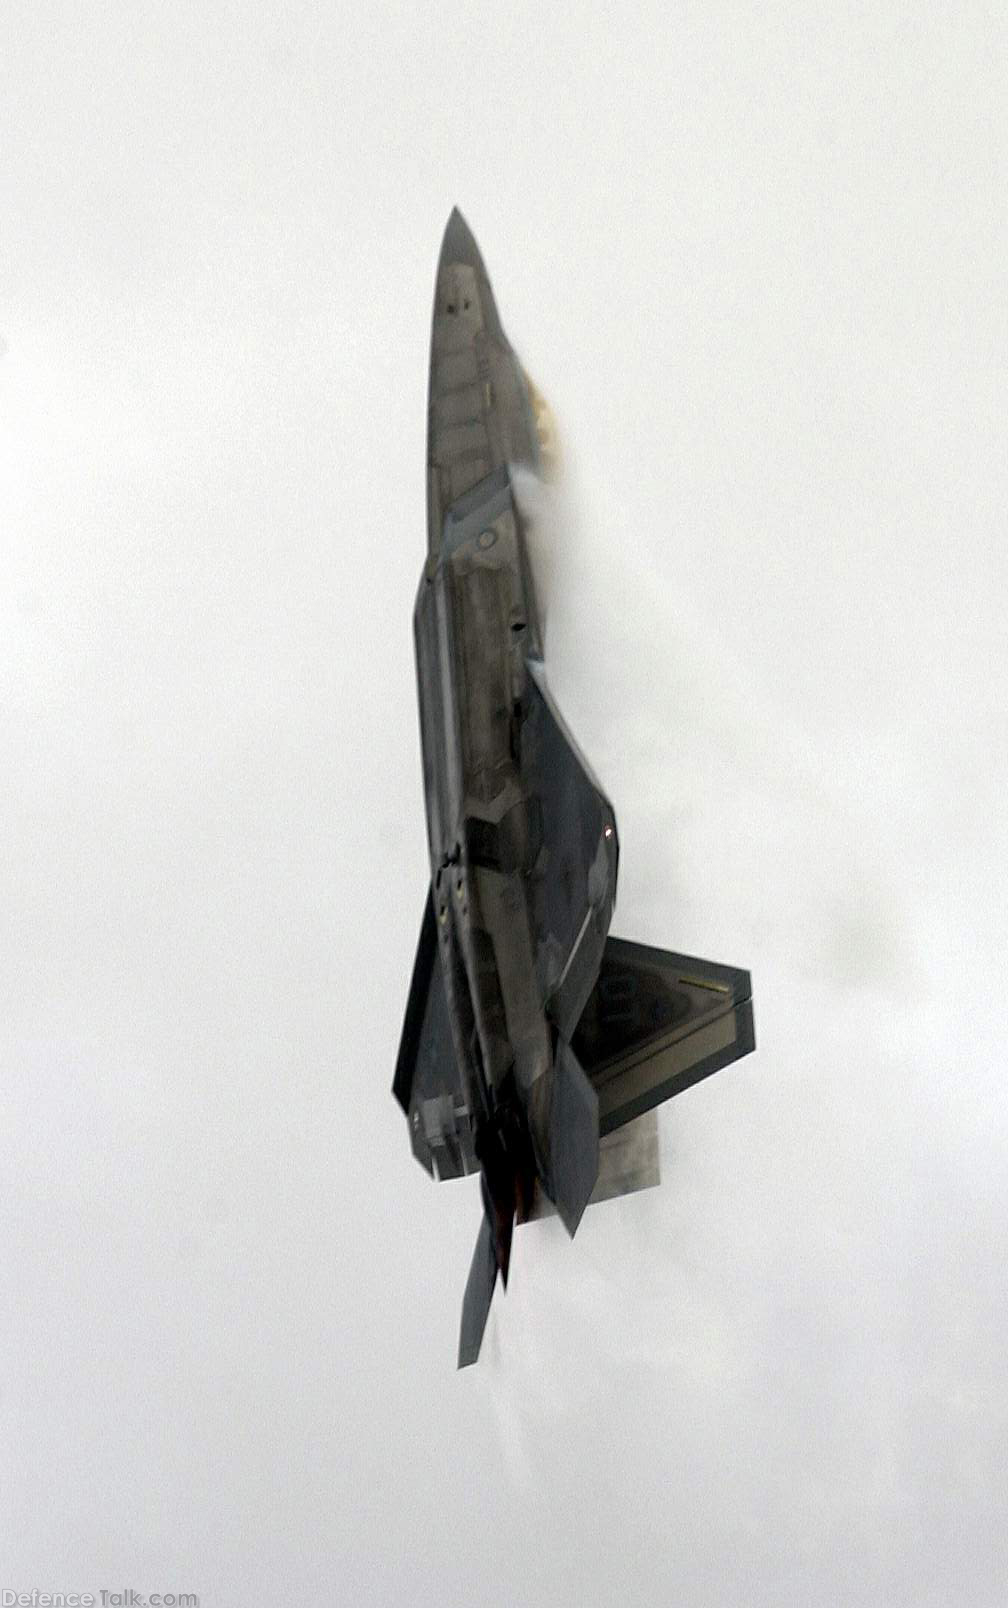 F-22 Raptor - Stealth Fighter Aircraft, US Air Force